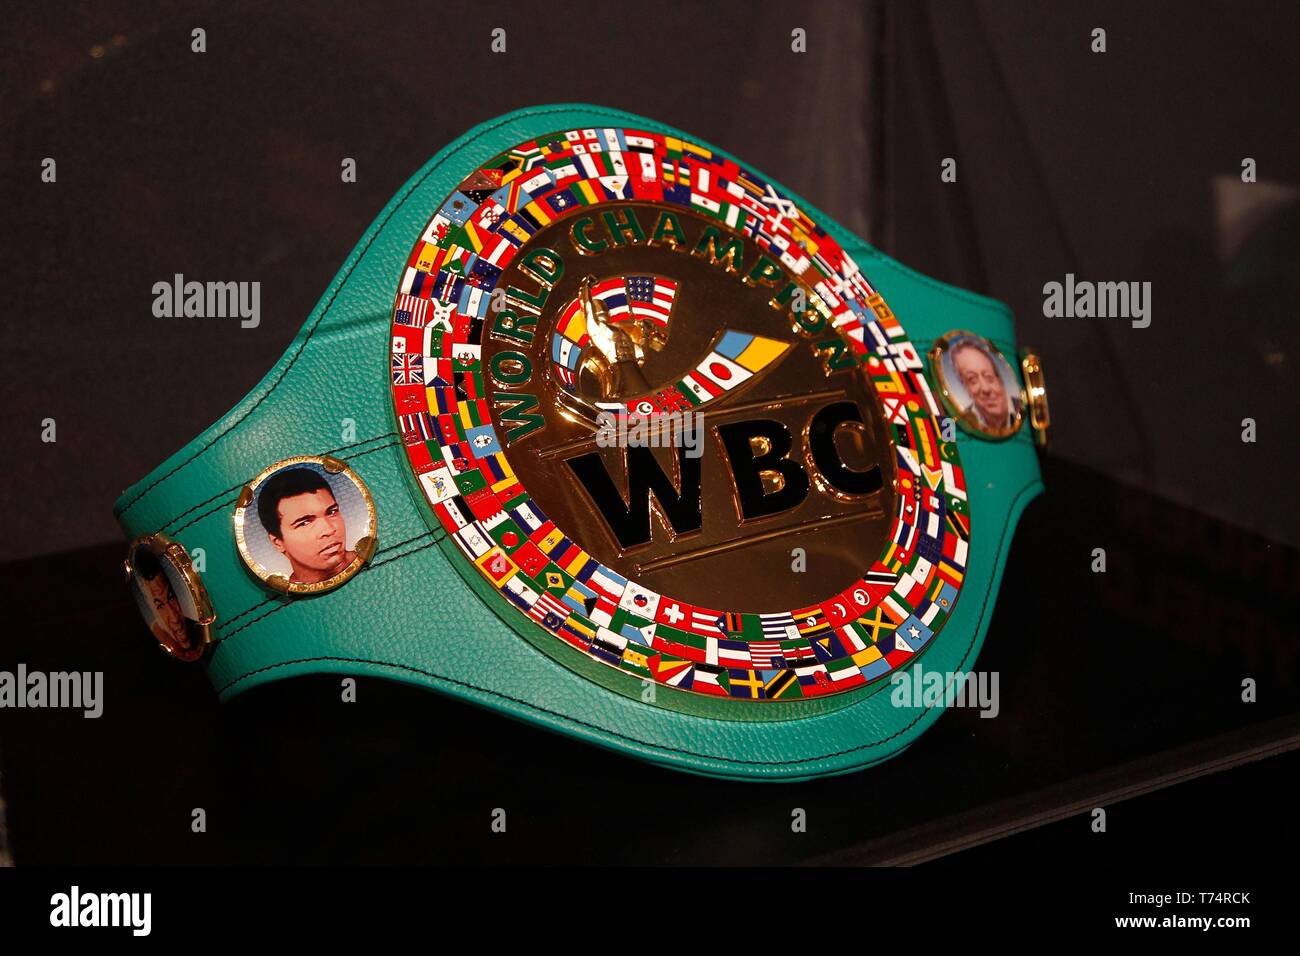 Wbc championship belt hi-res stock photography and images - Alamy